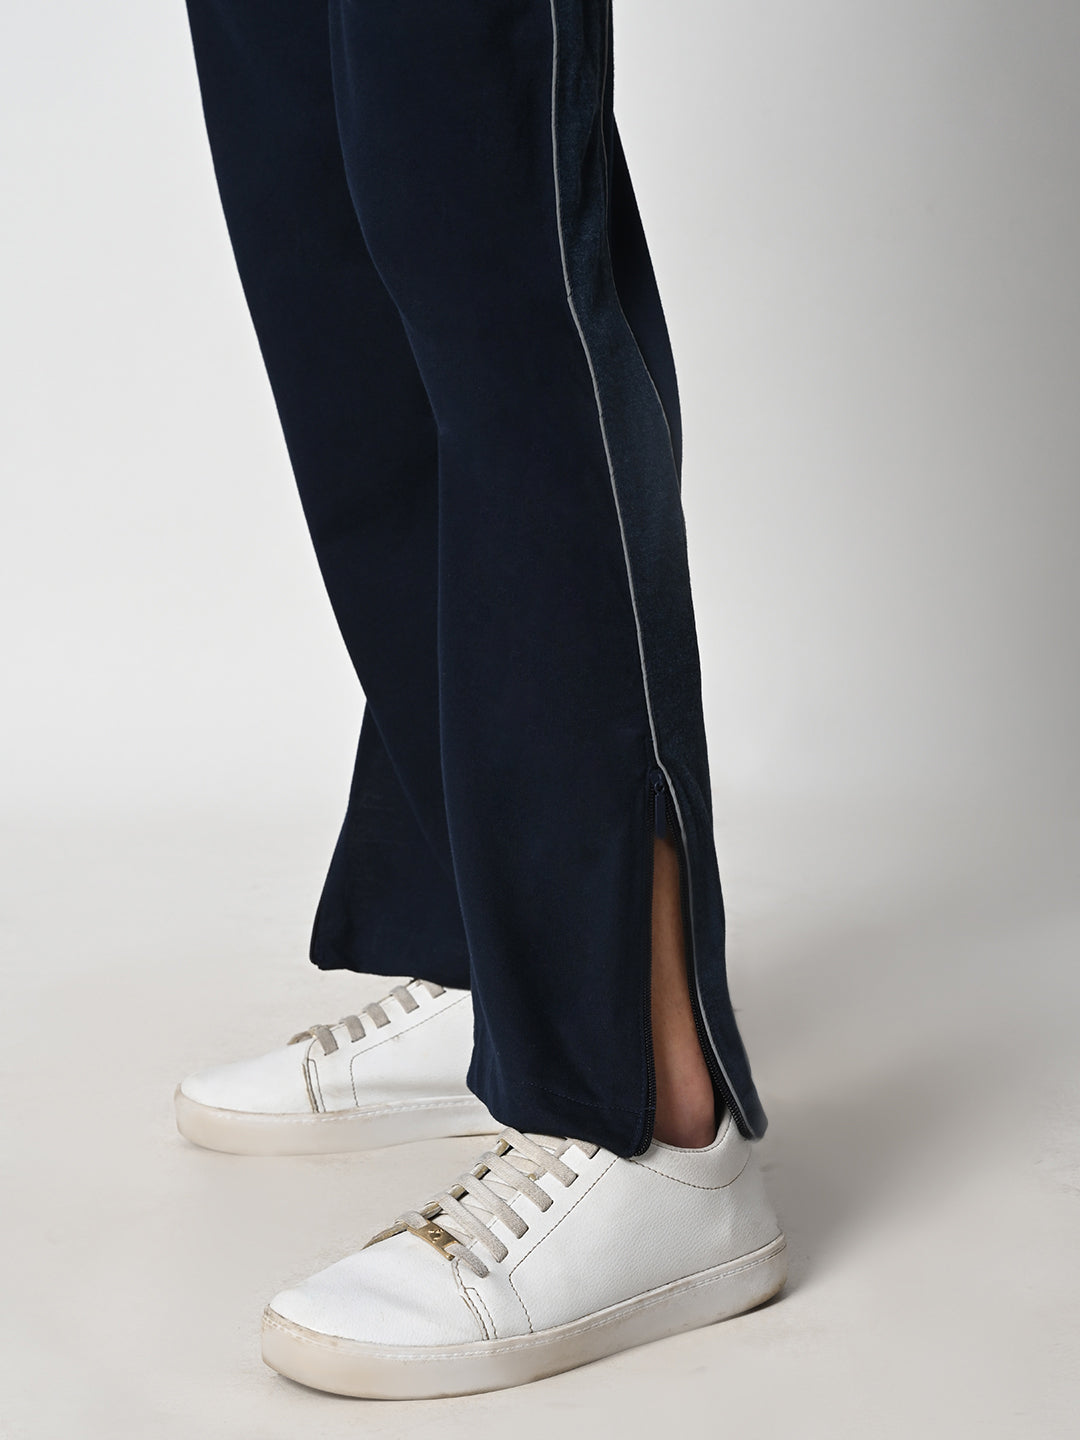 Reflective Side Stripe Cotton Track Pant for Women (Navy Blue)